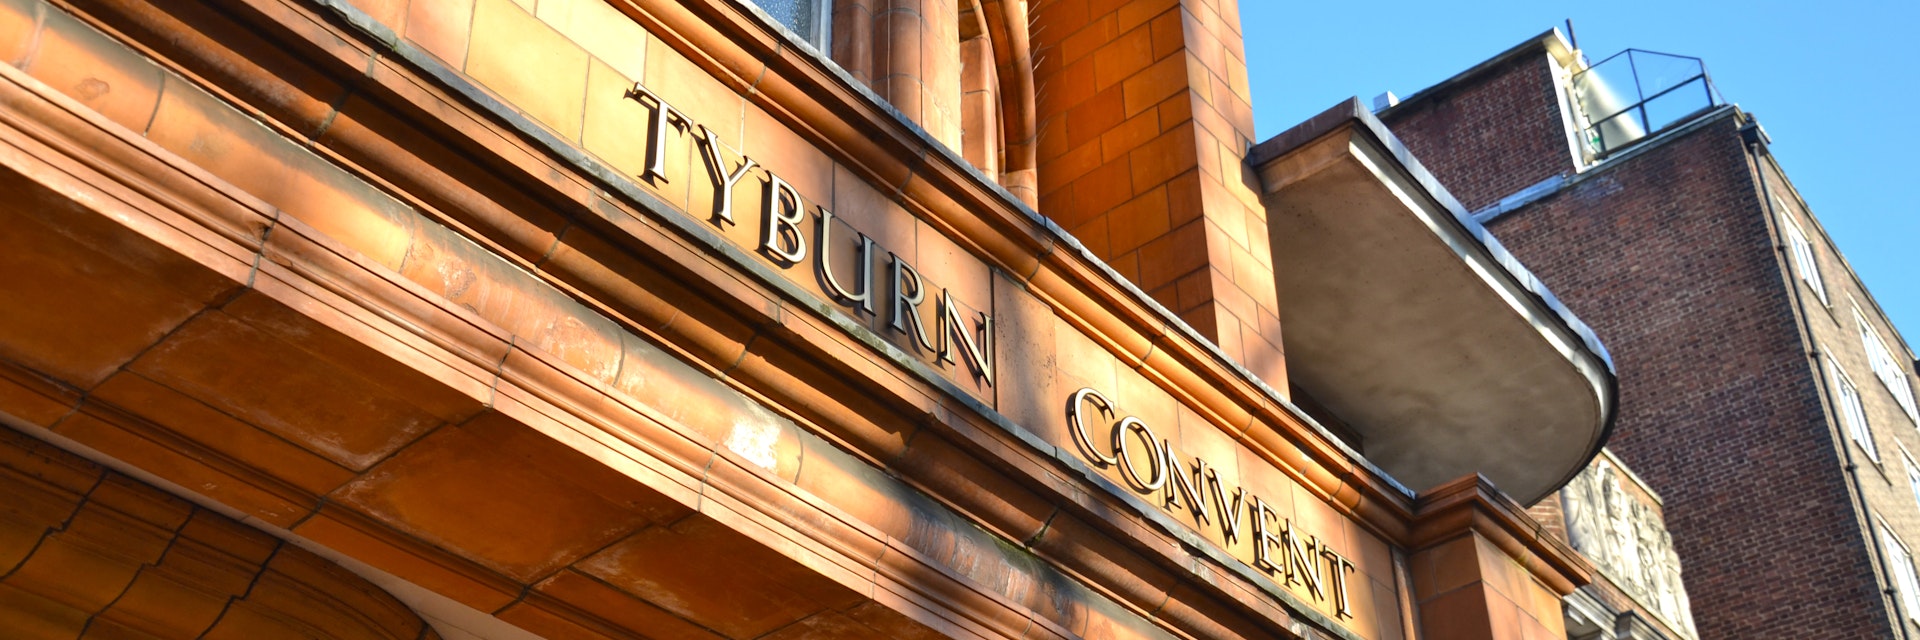 The outside of Tyburn Covent